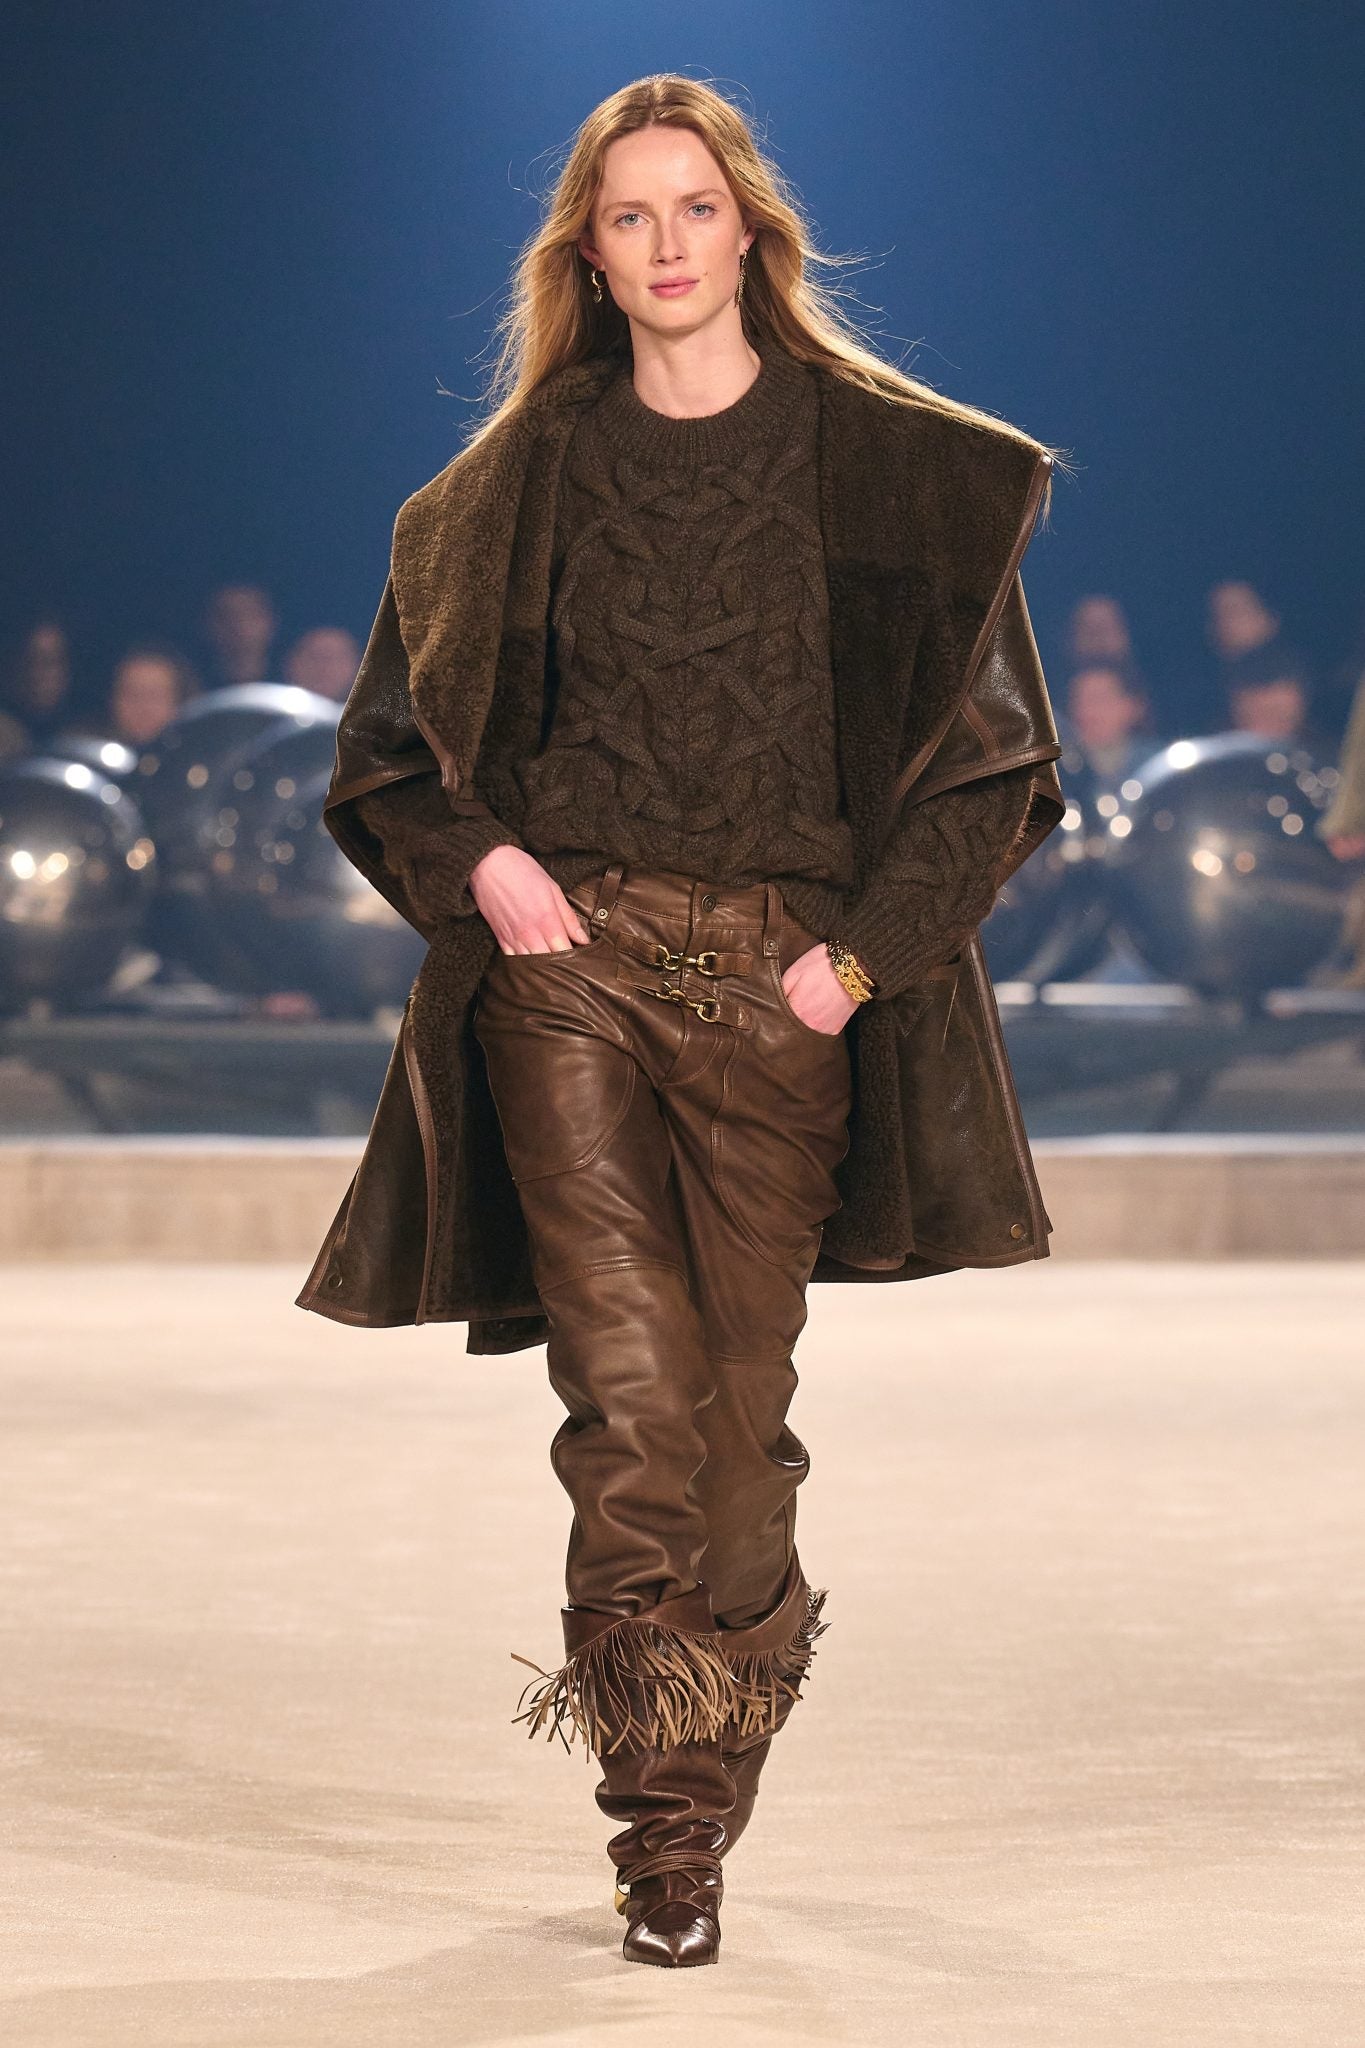 Female model on catwalk wearing a chunky cable-knit sweater under an oversized coat with leather pants tucked into fringed boots, all in brown.